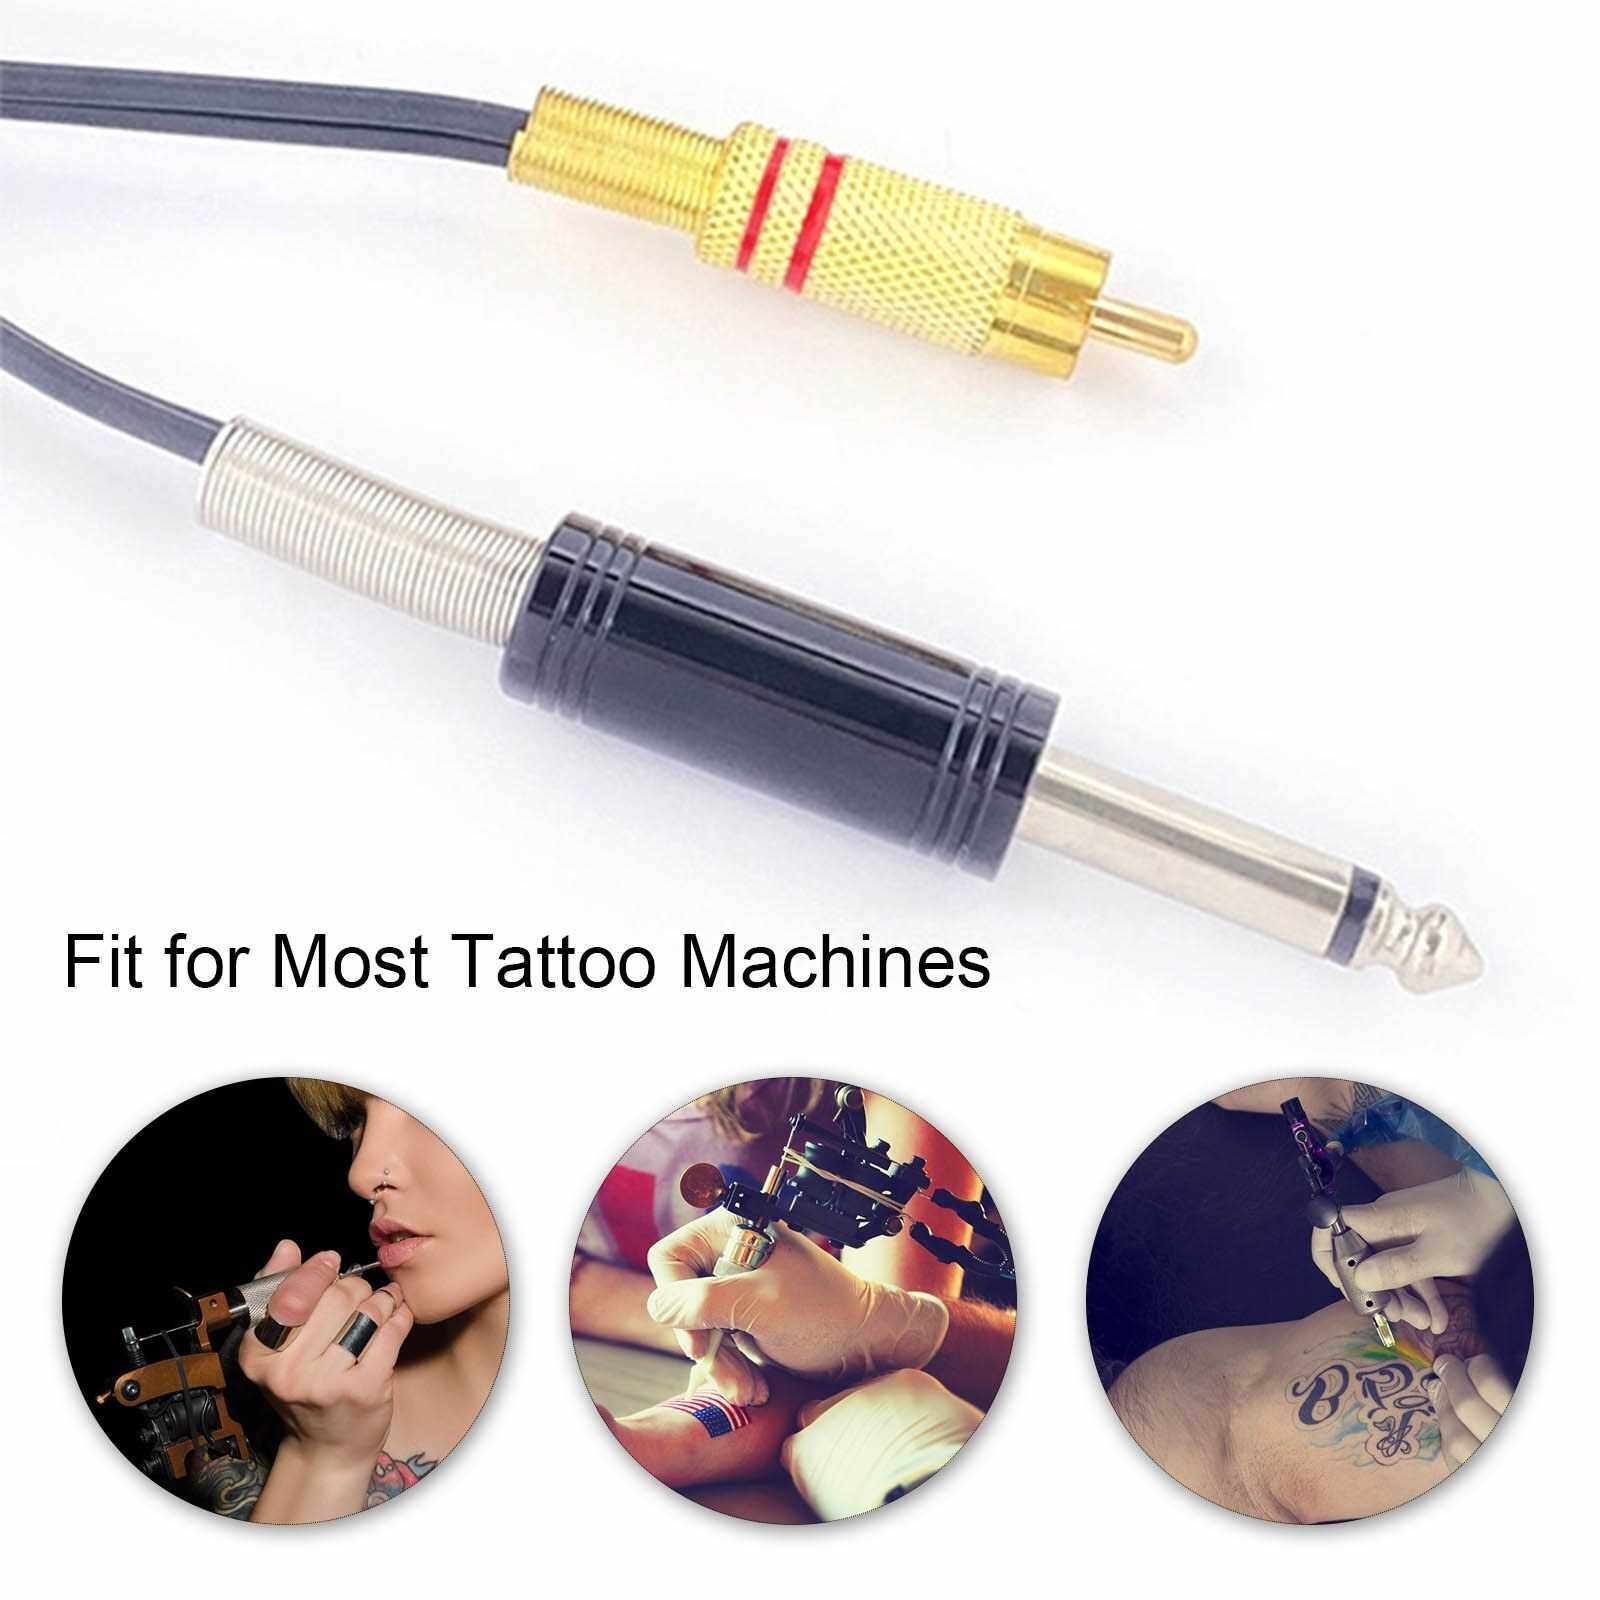 BEST SELLER Silicone Tattoo RCA Connector Cords Cable for Rotary Tattoo Pen Tattoo Machines Power Cord Ultra Soft (Black)